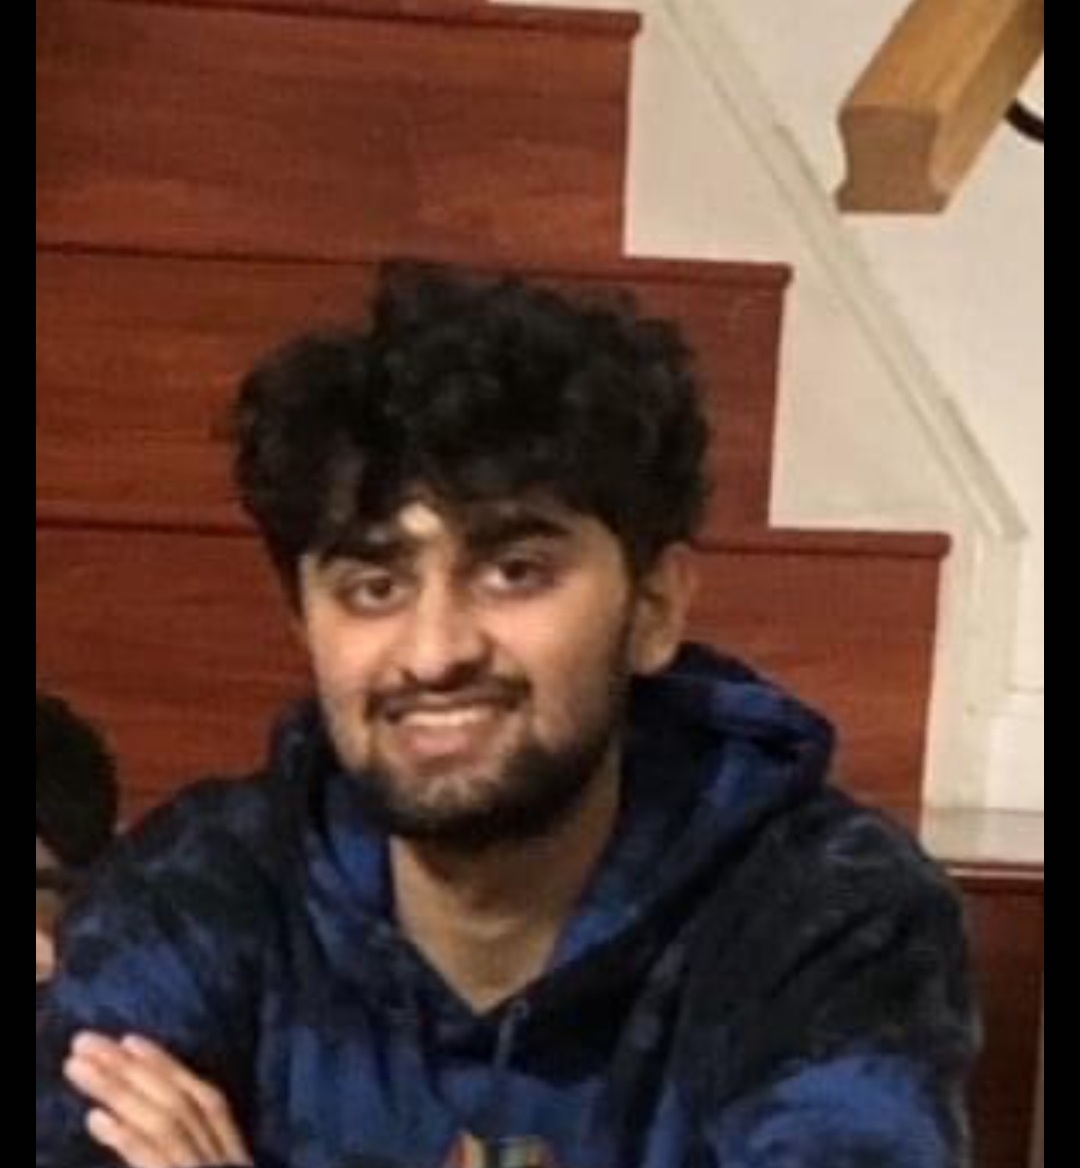 tharva Chinchwadkar was reported missing to the City of Fremont Police Department on Tuesday, Feb. 23, 2021.